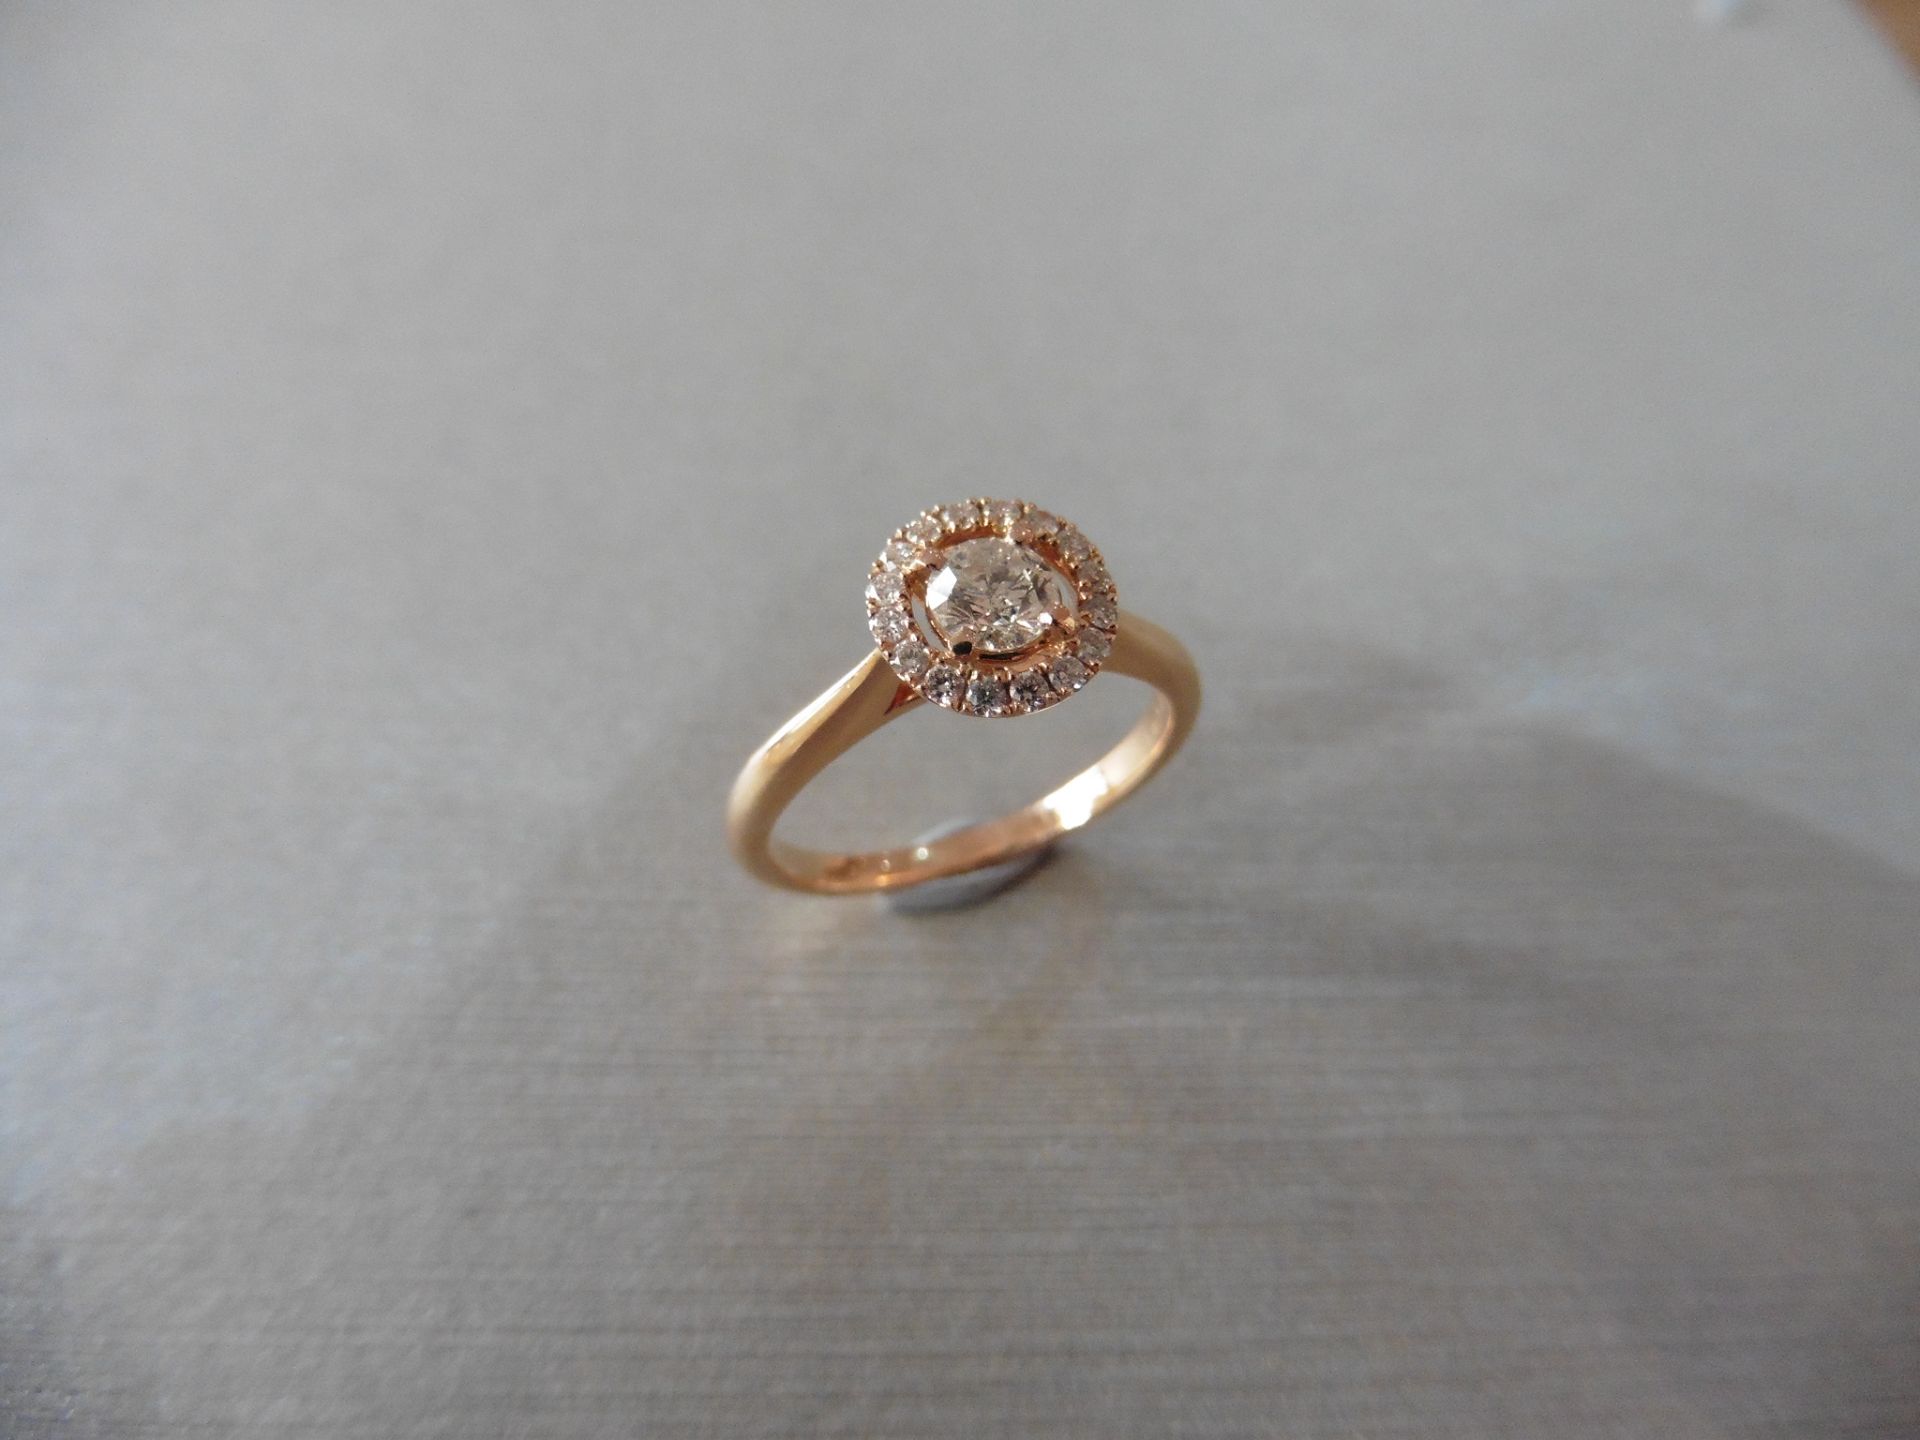 Brand new 18ct rose gold diamond set ring with a 0.30ct brilliant cut diamond, I/J colour which is